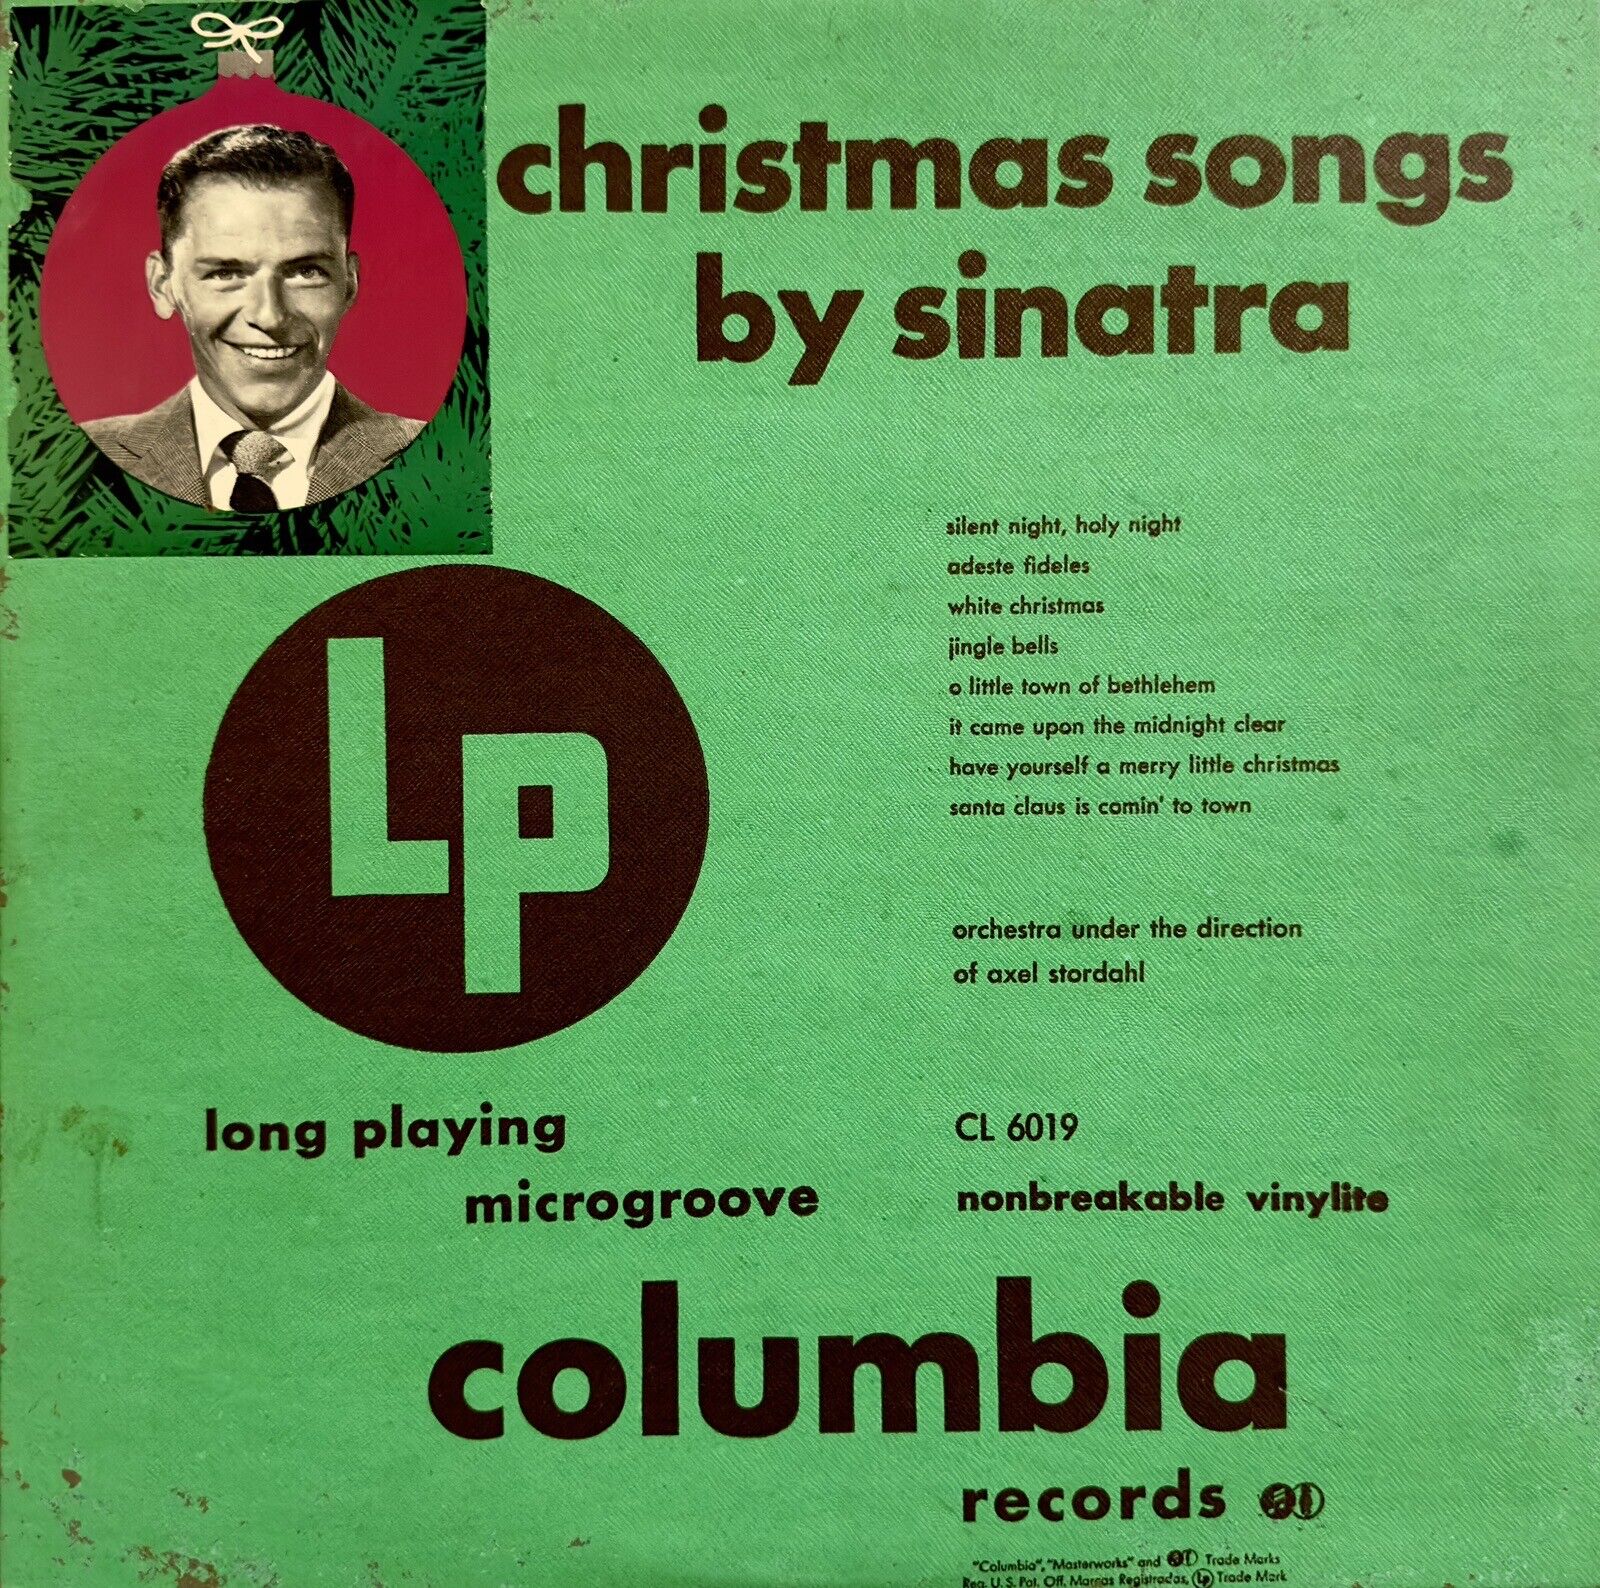 Frank Sinatra - Christmas Songs By Sinatra LP 78rpm 10” 1948 Columbia CL 6019